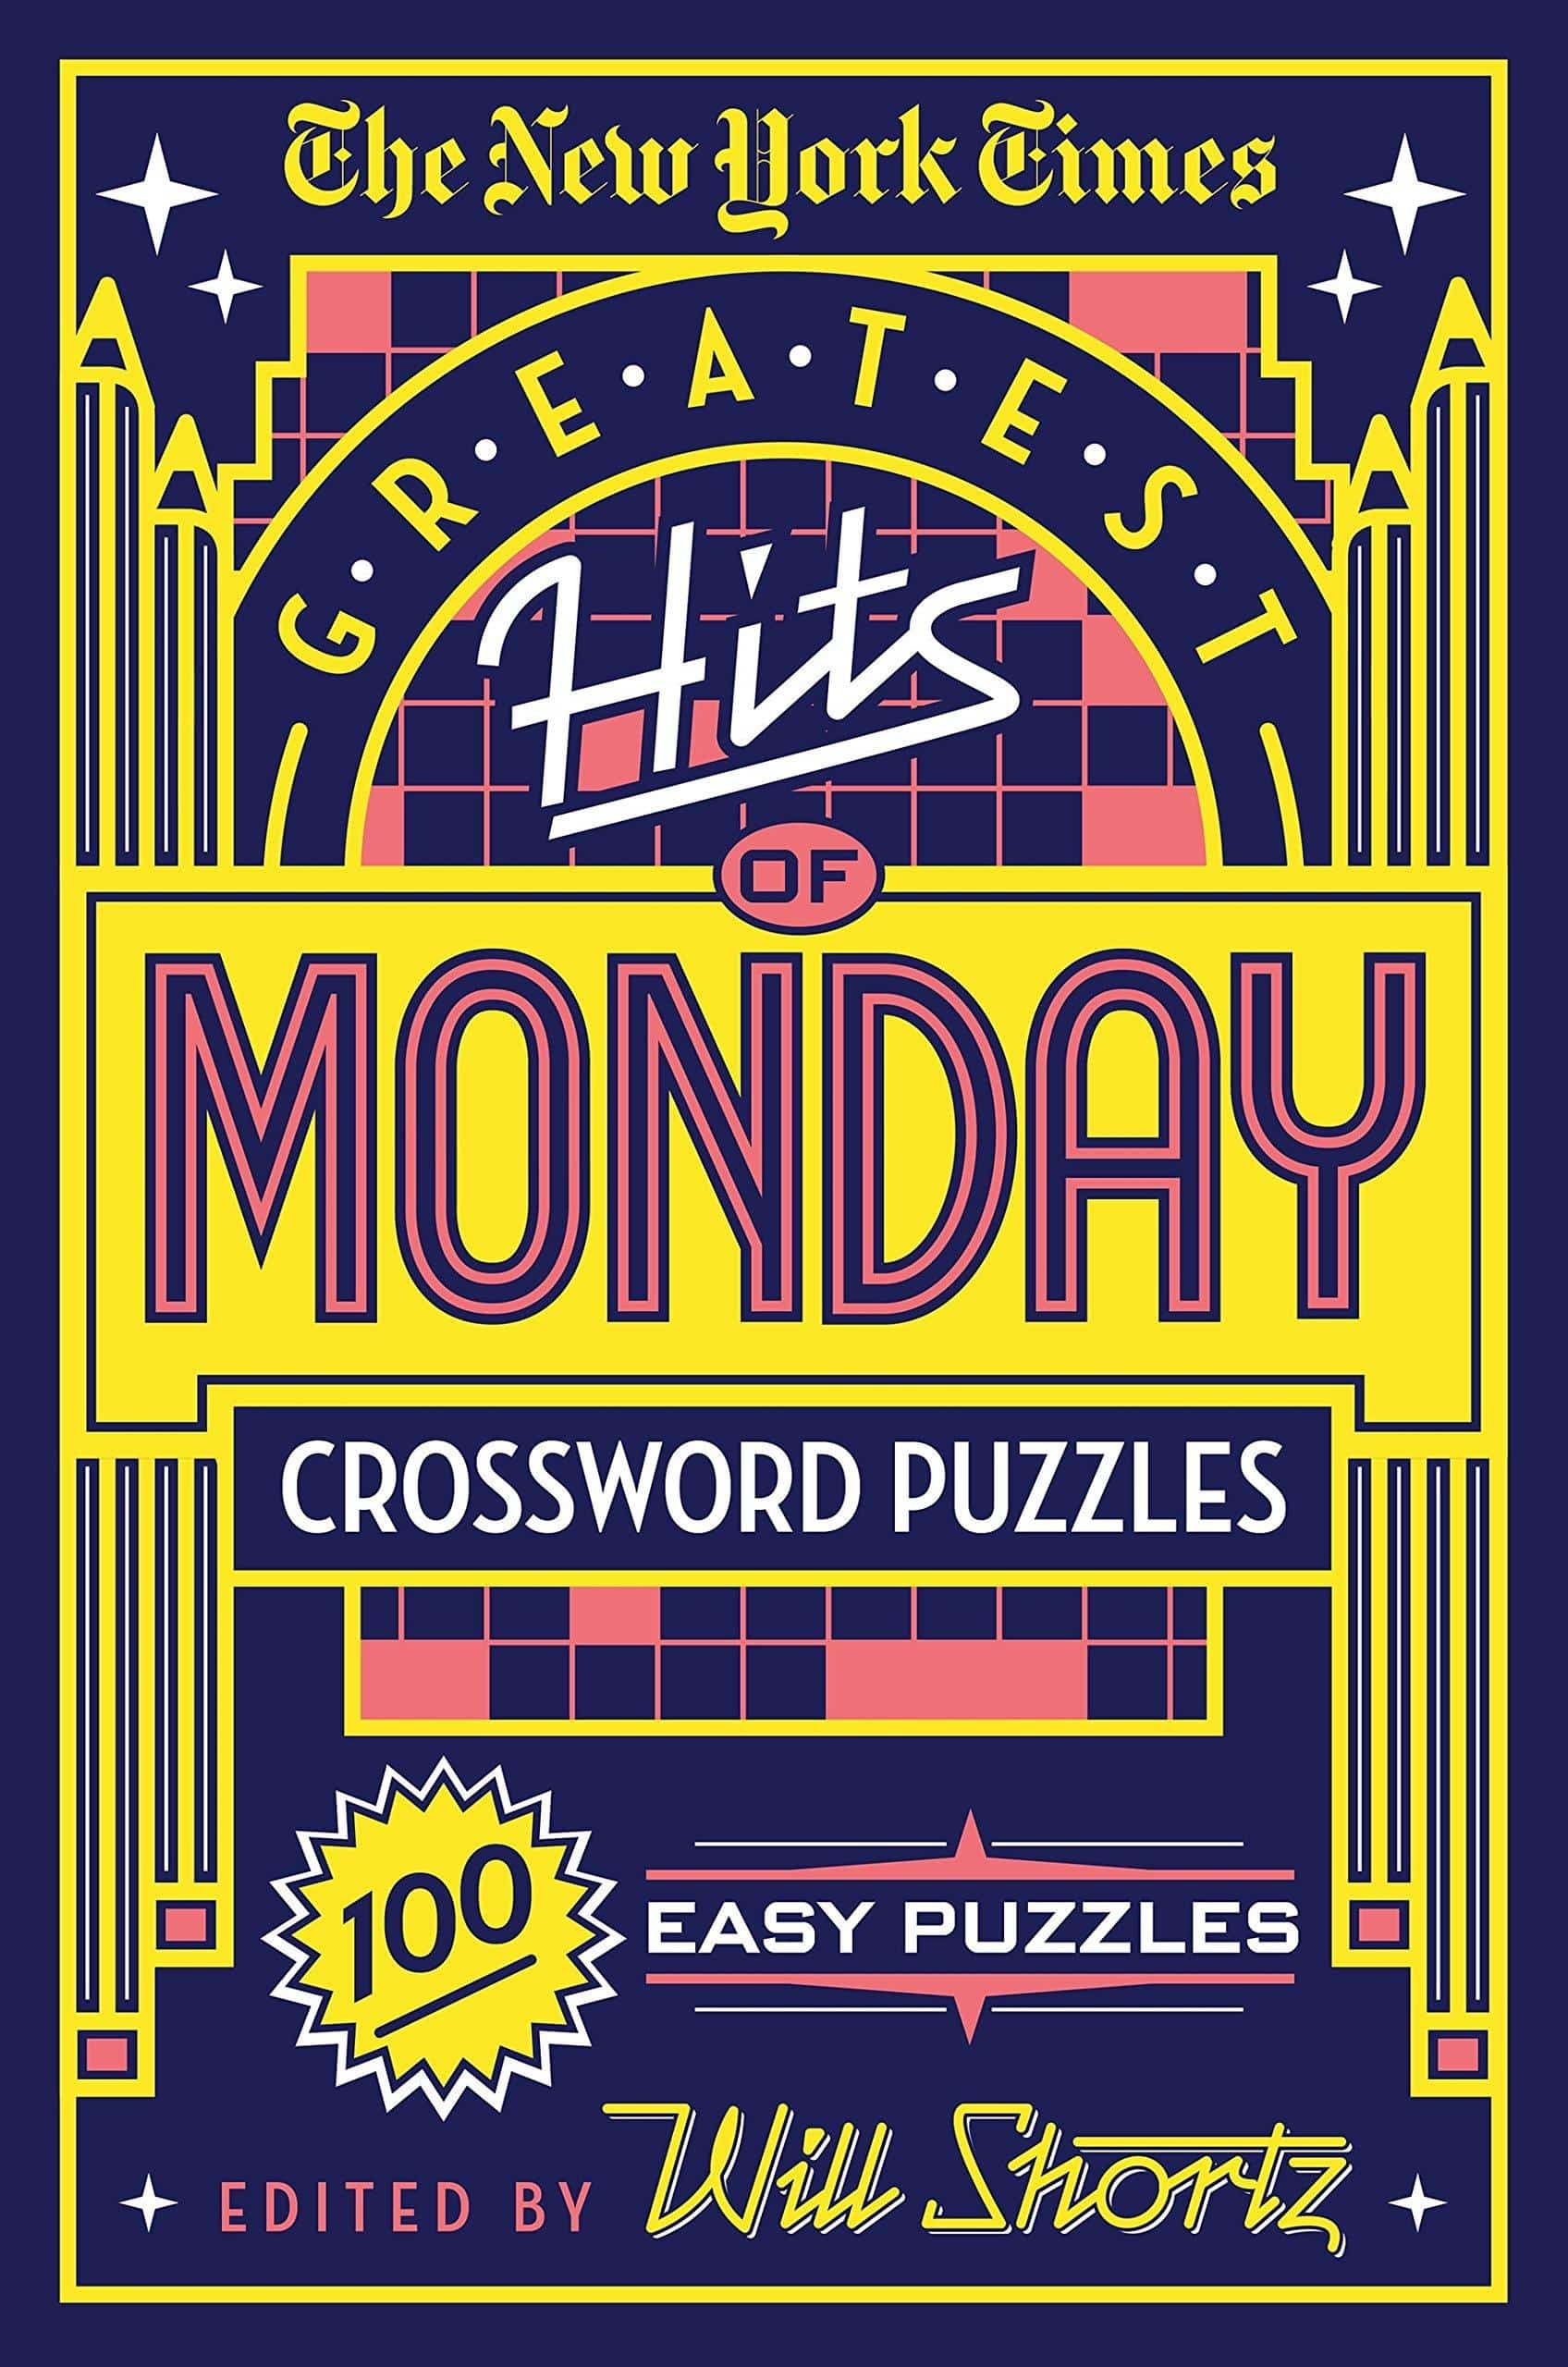 The New York Times Greatest Hits of Monday Crossword Puzzles - SureShot Books Publishing LLC